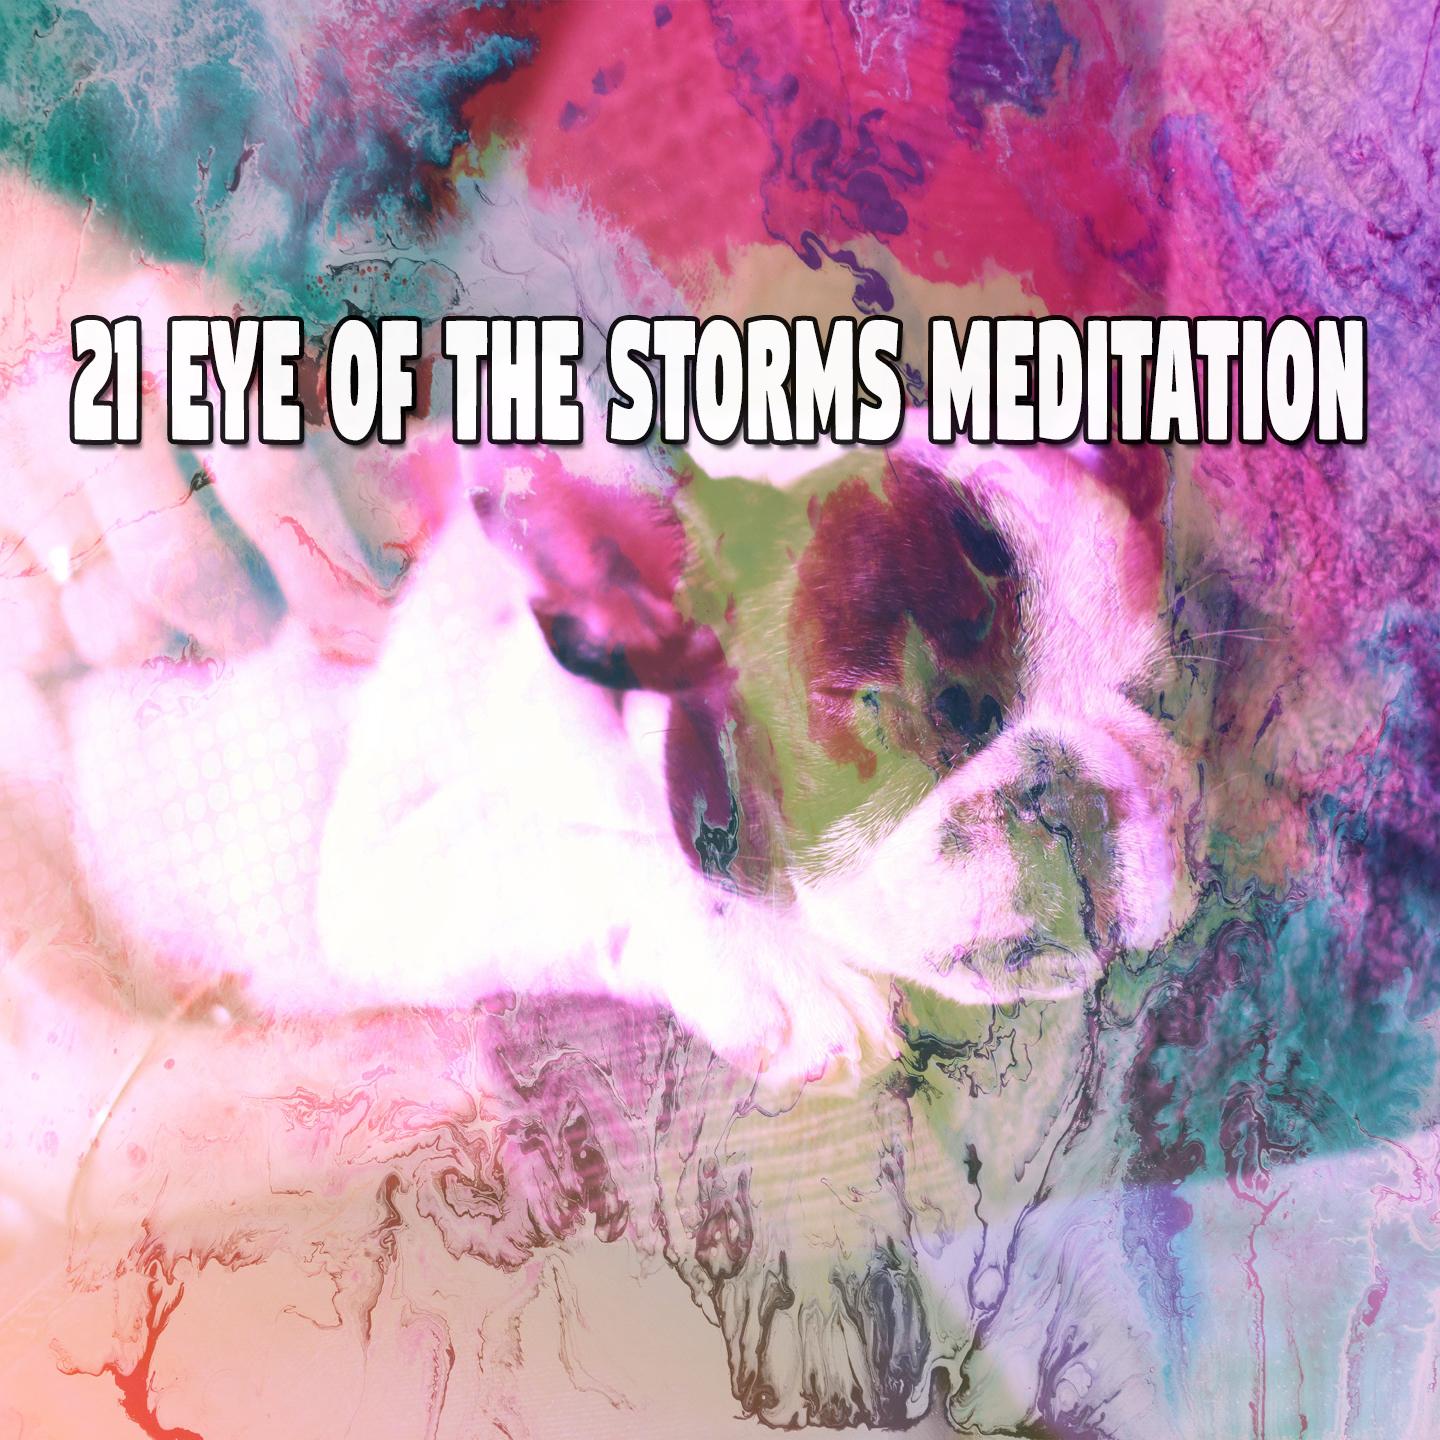 21 Eye of the Storms Meditation